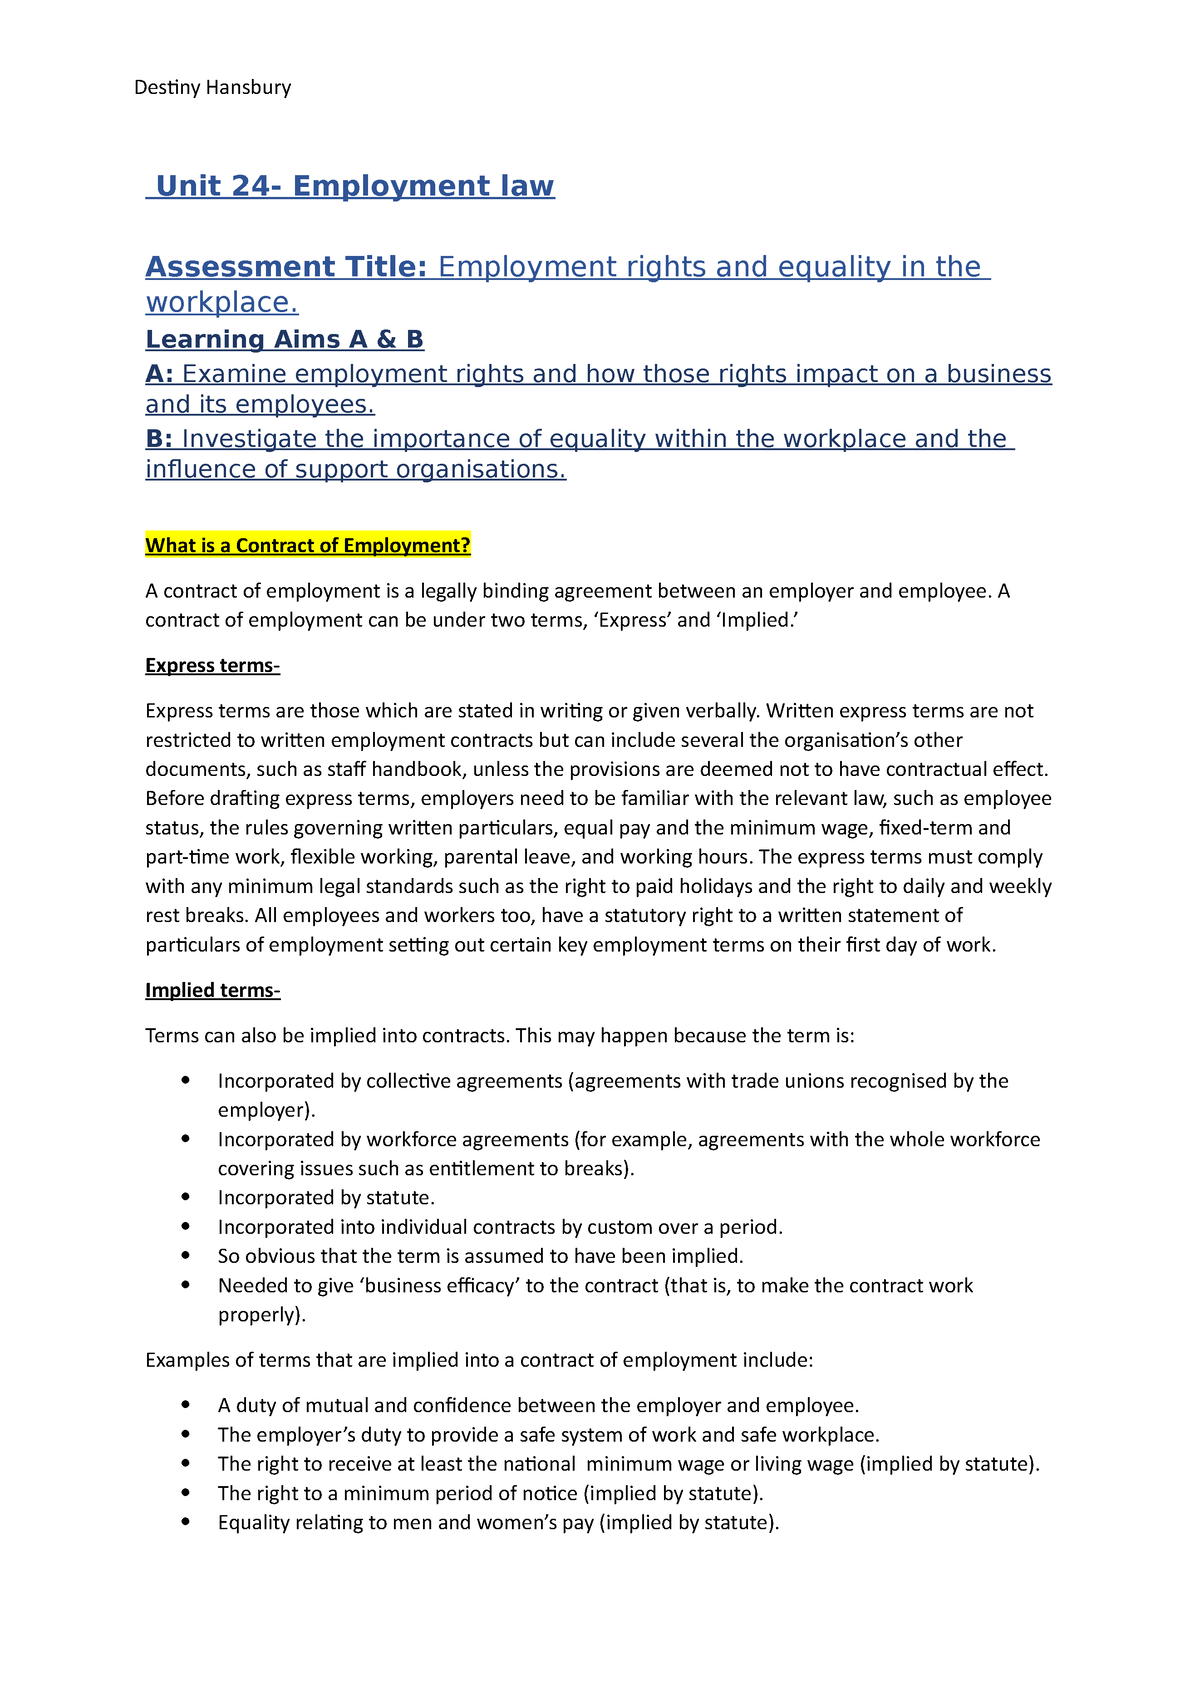 unit 24 employment law assignment 2